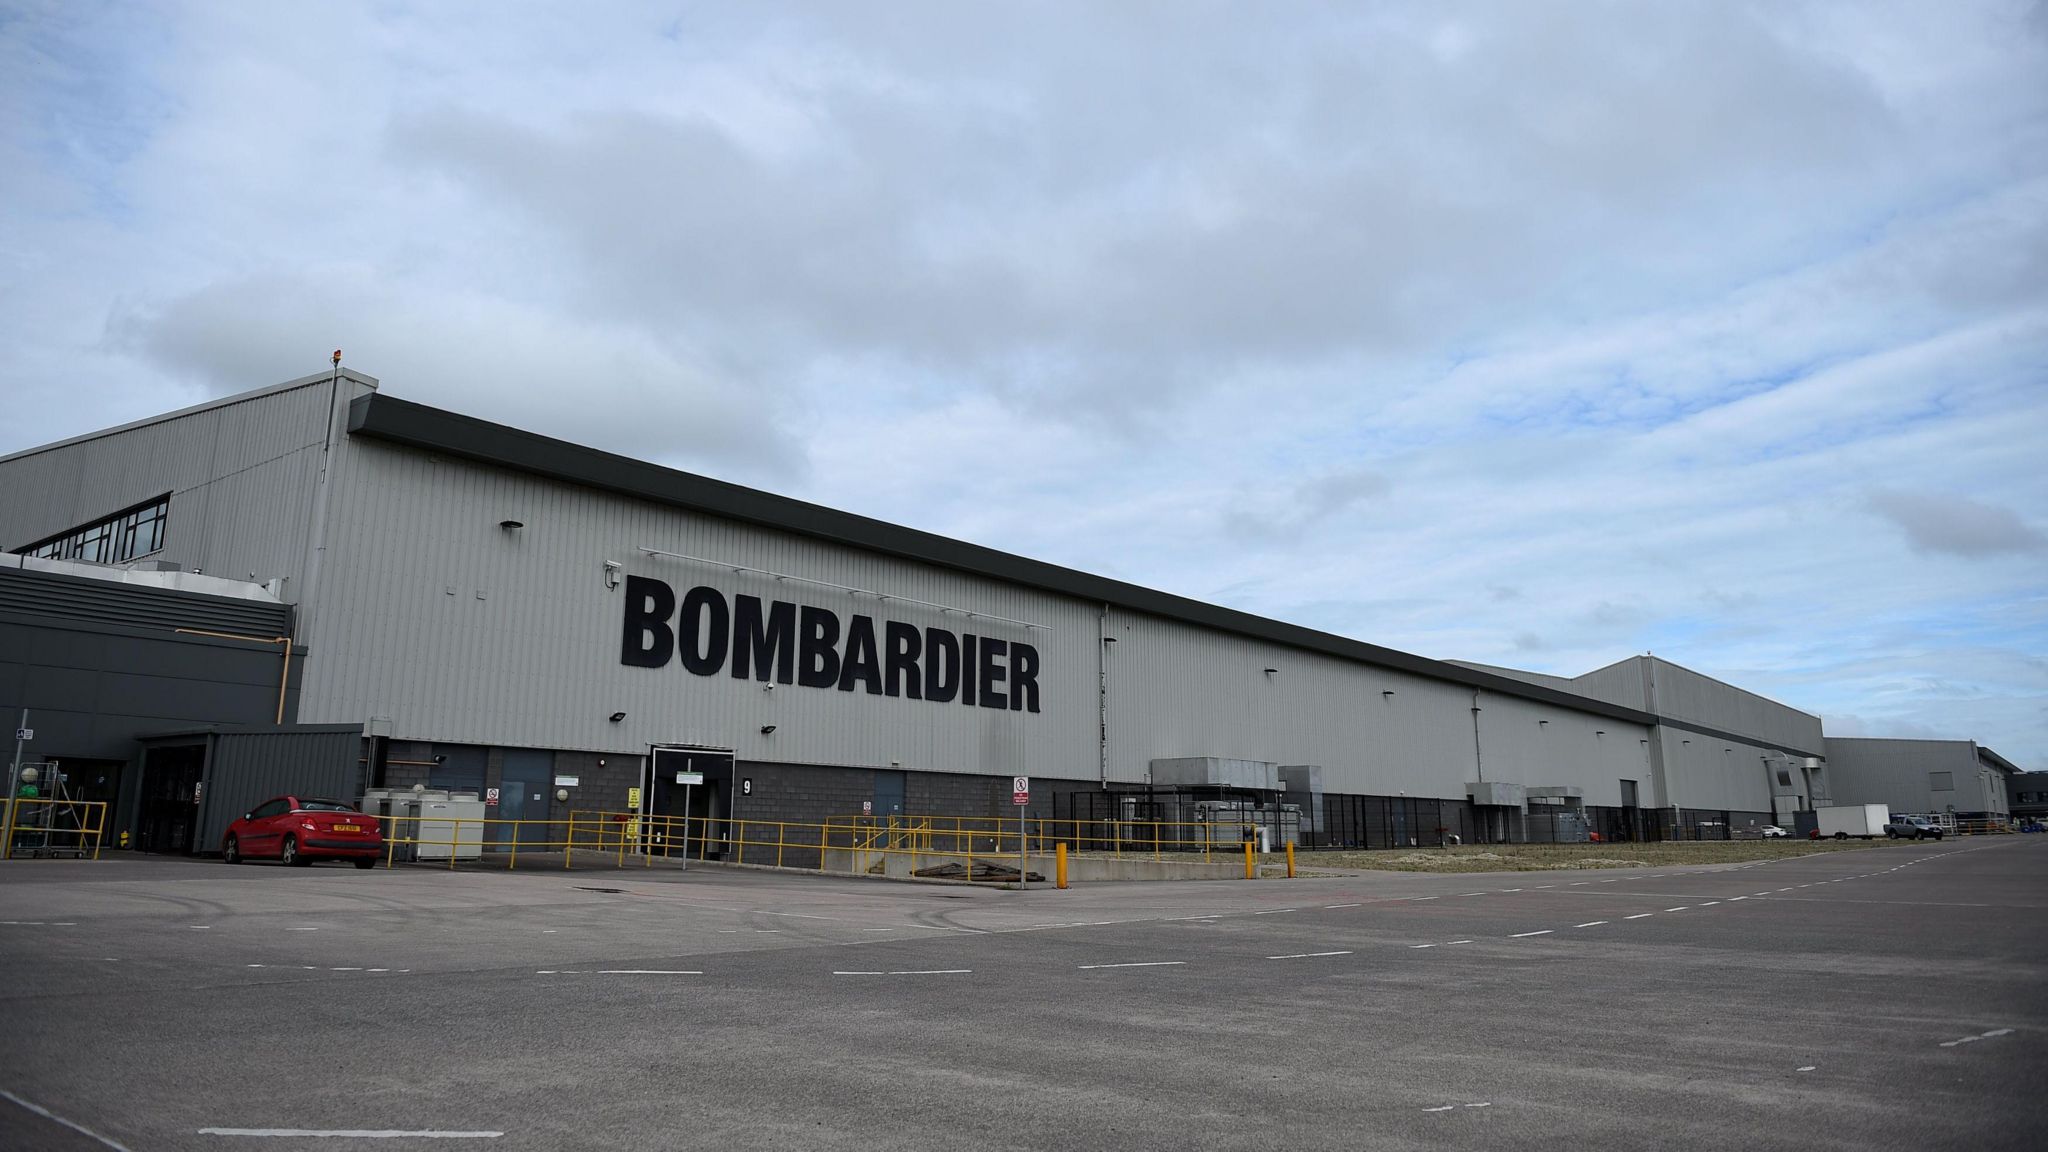 A view of the Bombardier Aerospace factory in Belfast, Northern Ireland